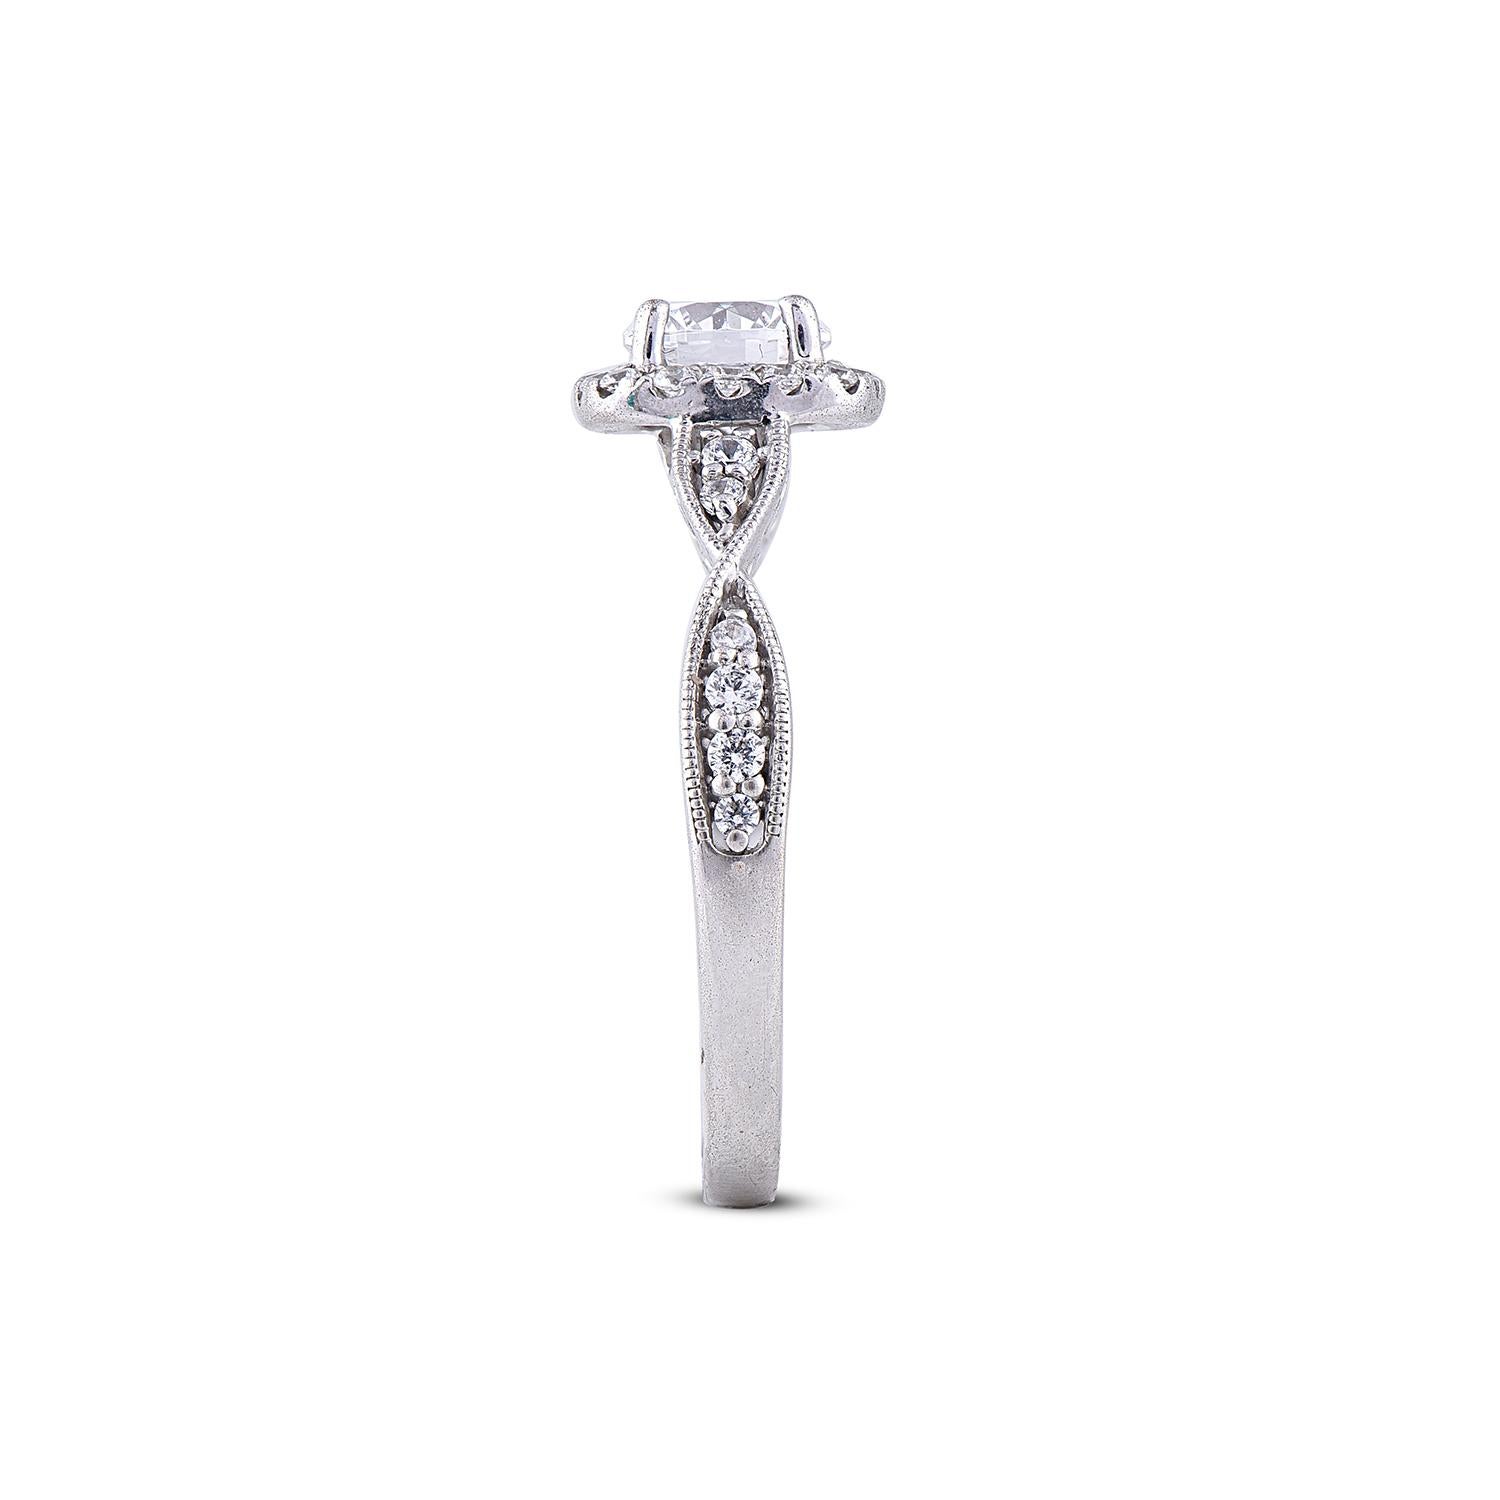 TJD 1.58 Ct Round Diamond 18KT White Gold Twisted Shank Cushion Shape Halo Ring In New Condition For Sale In New York, NY